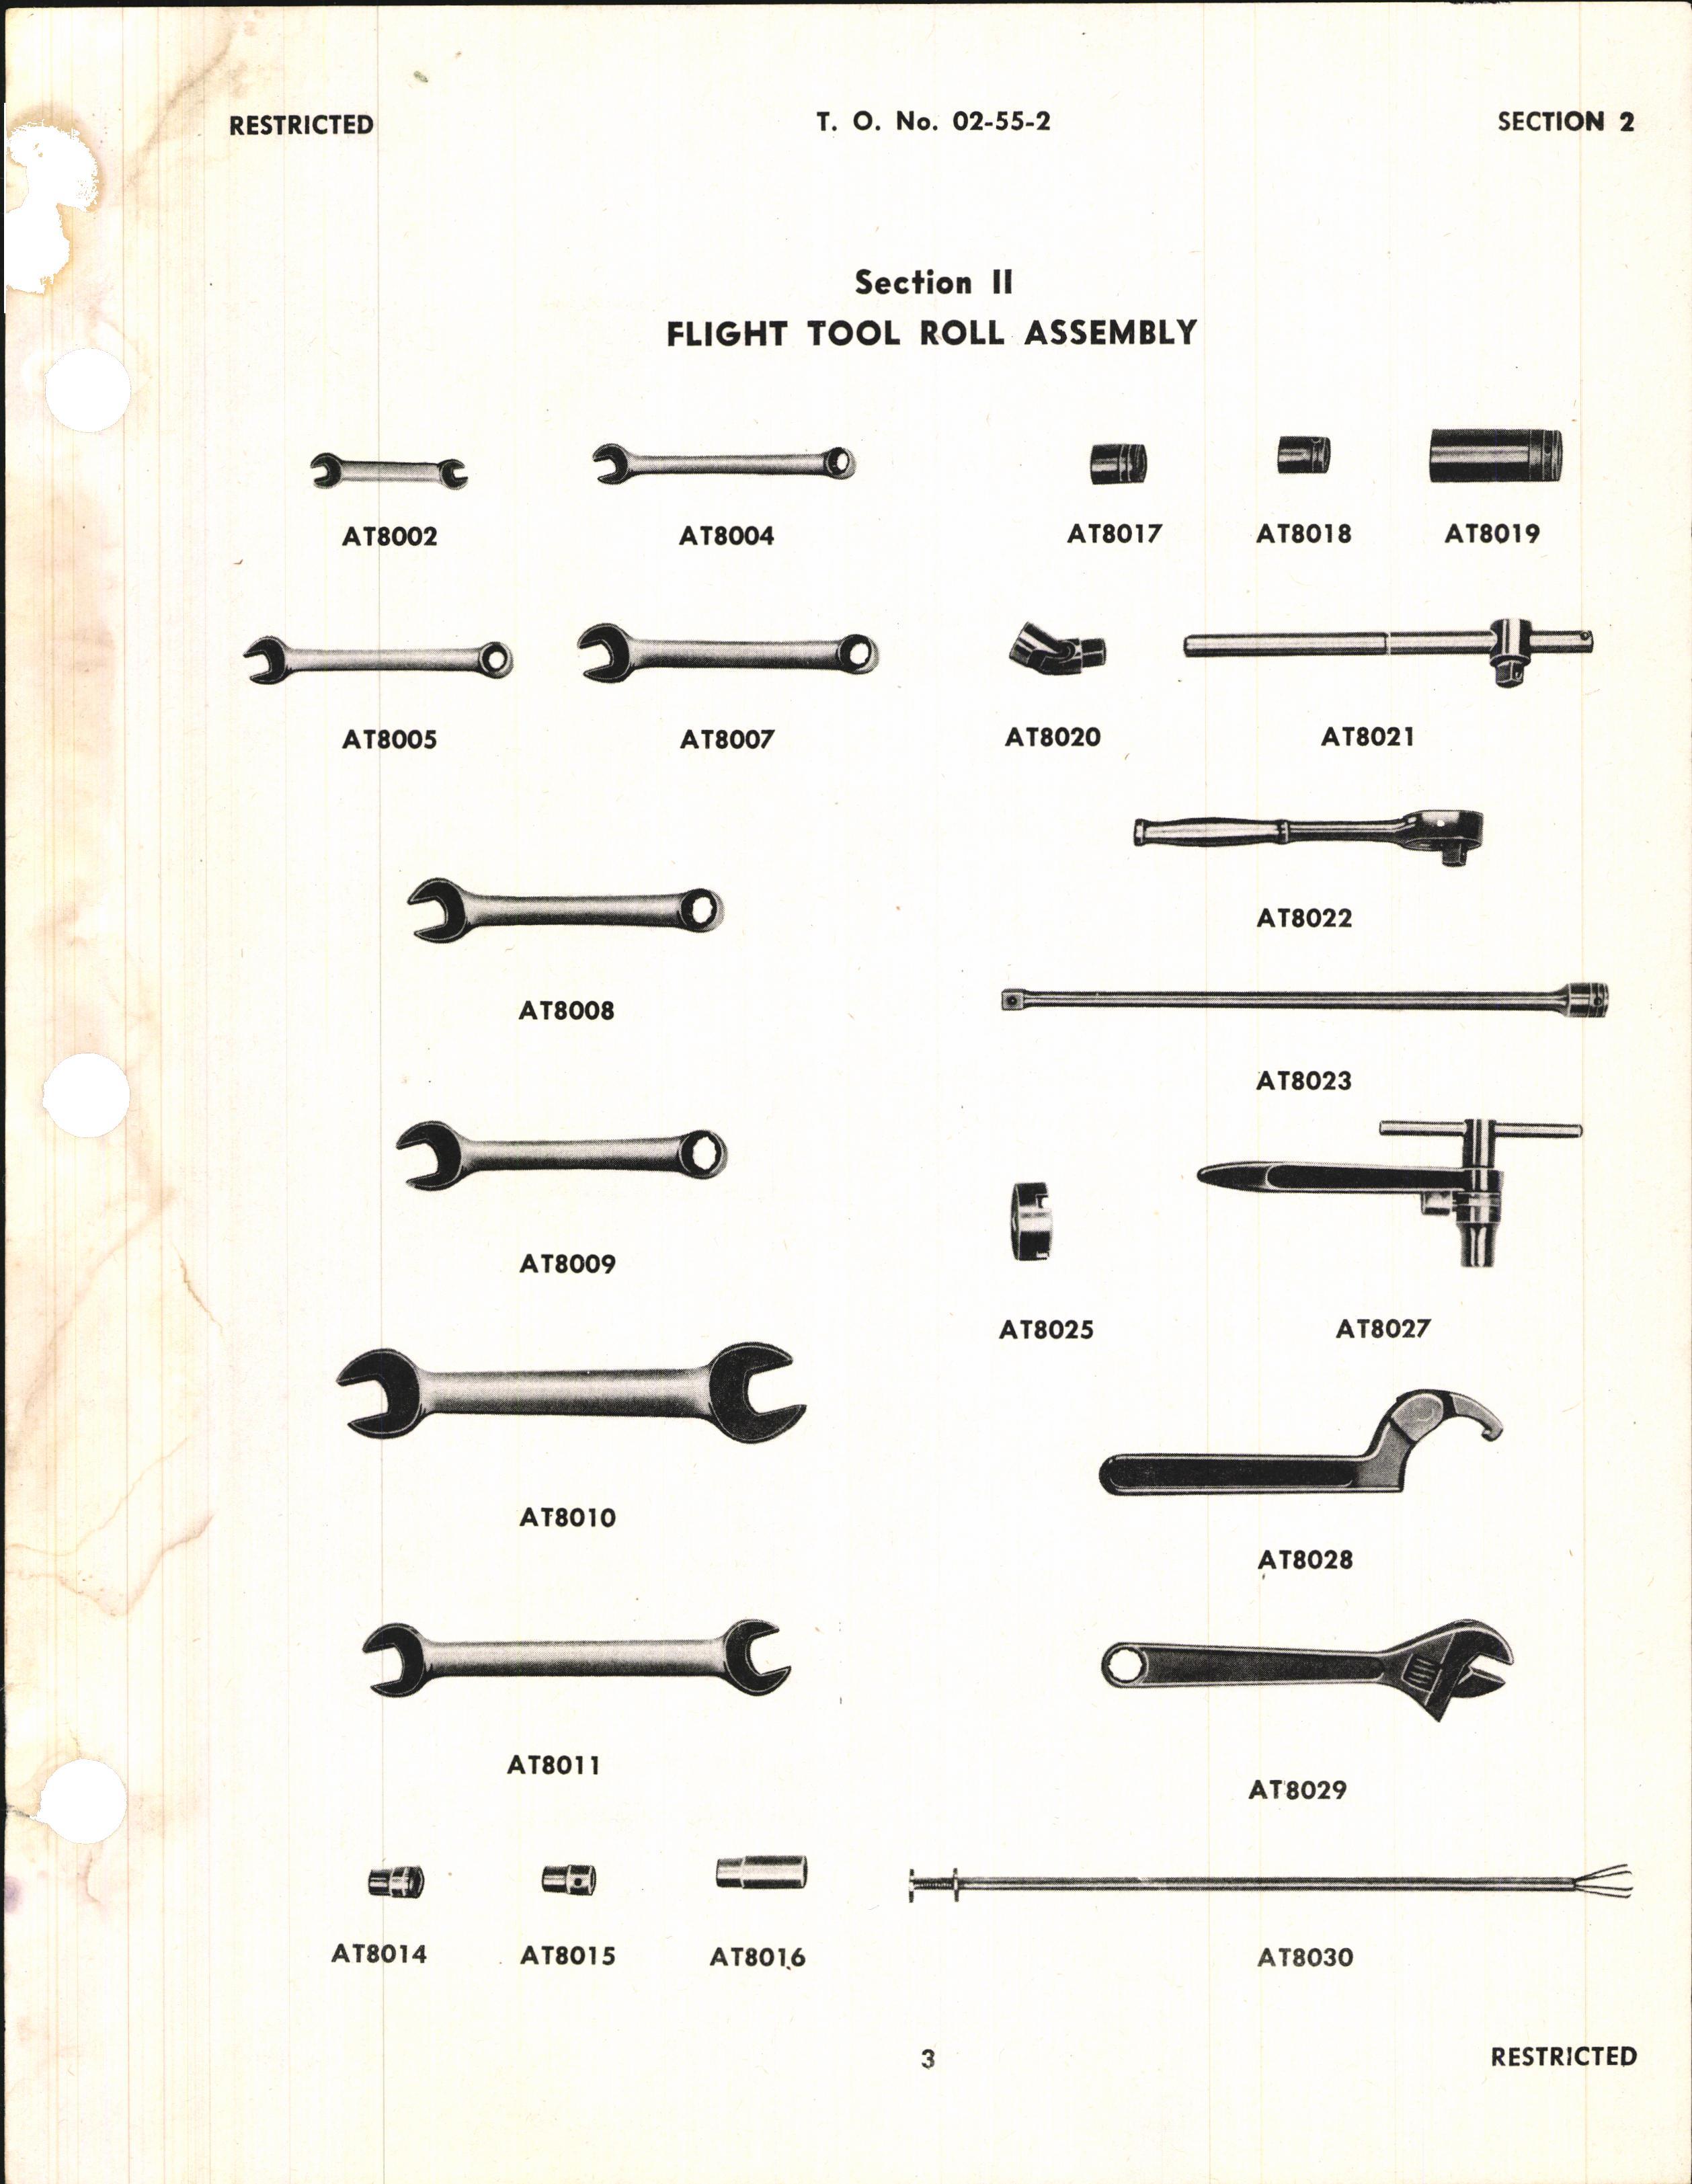 Sample page 5 from AirCorps Library document: Service Tools Catalog for Rolls-Royce Aircraft Engines